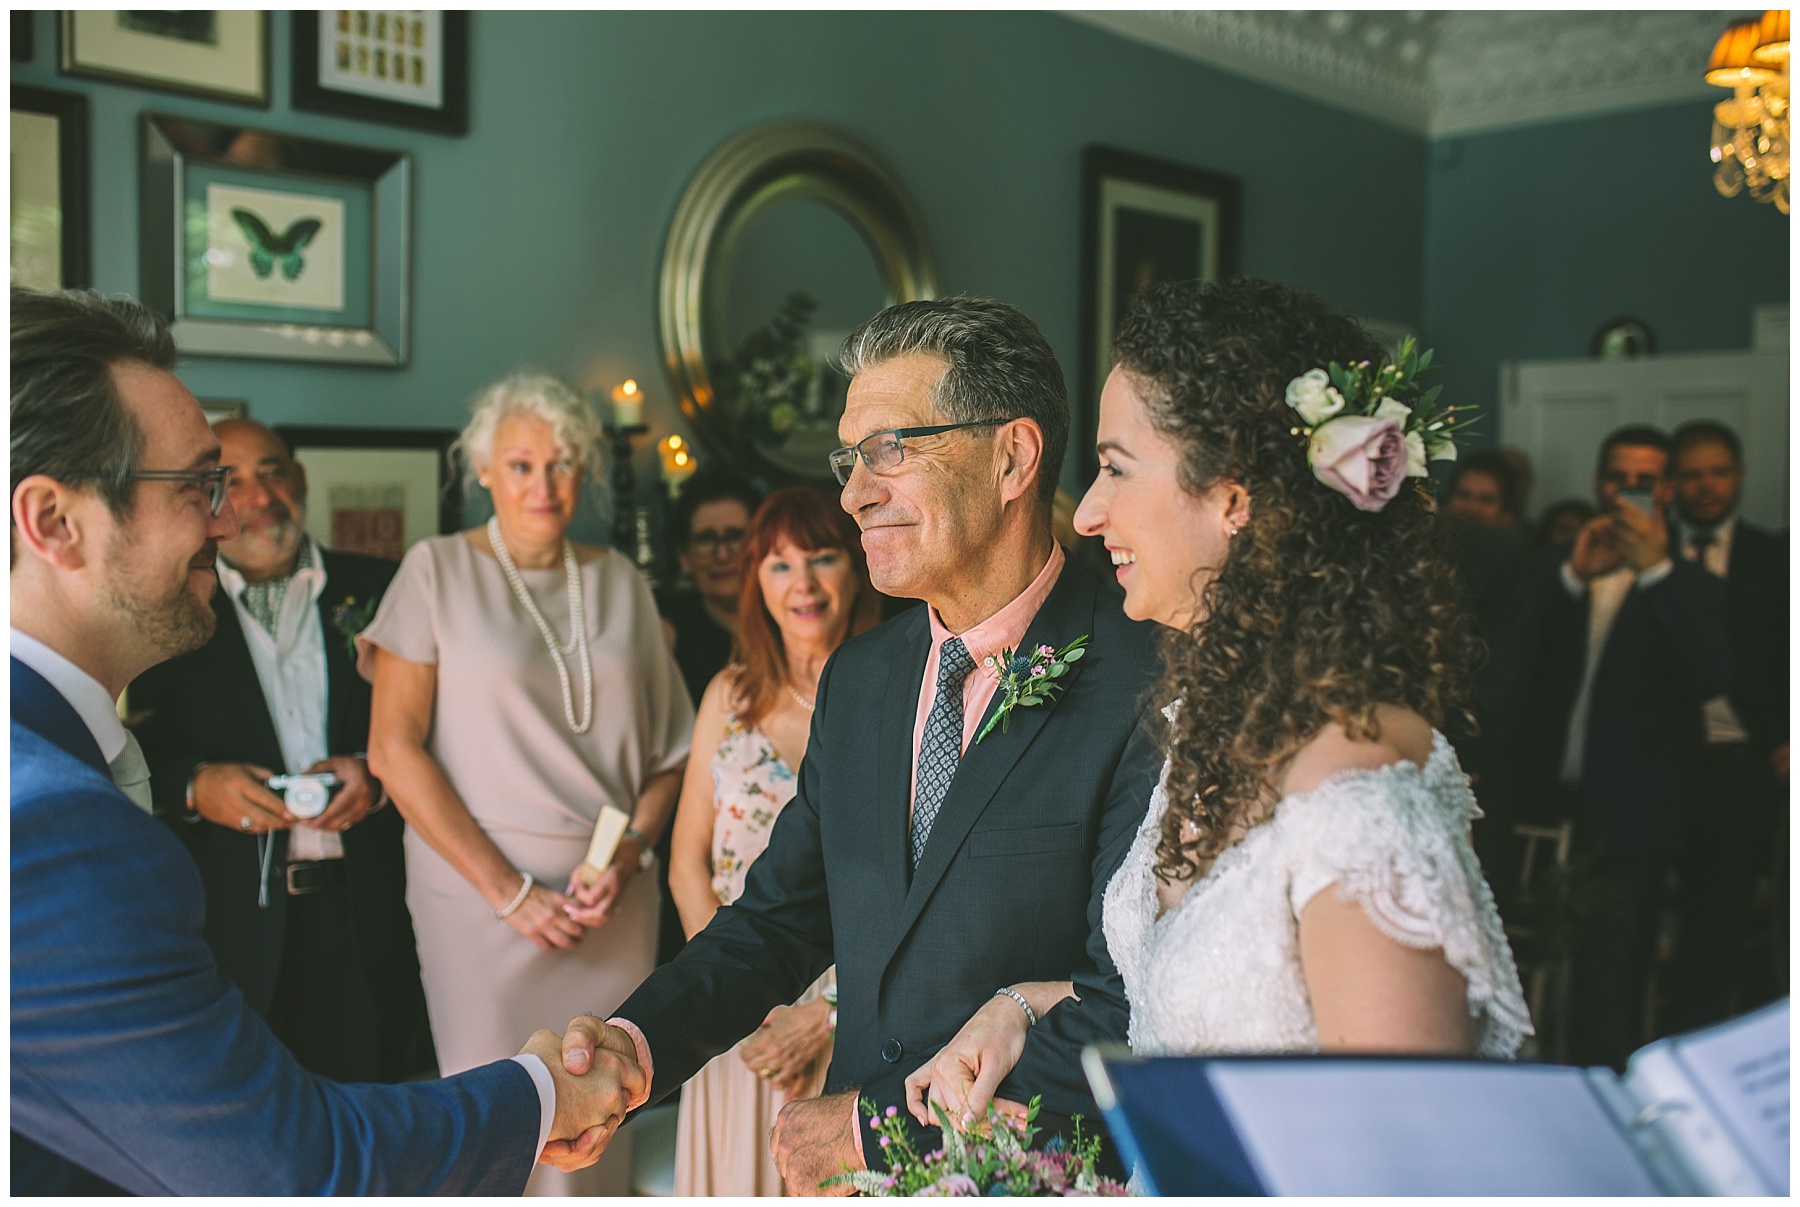 Father of the bride shakes hands with the groom